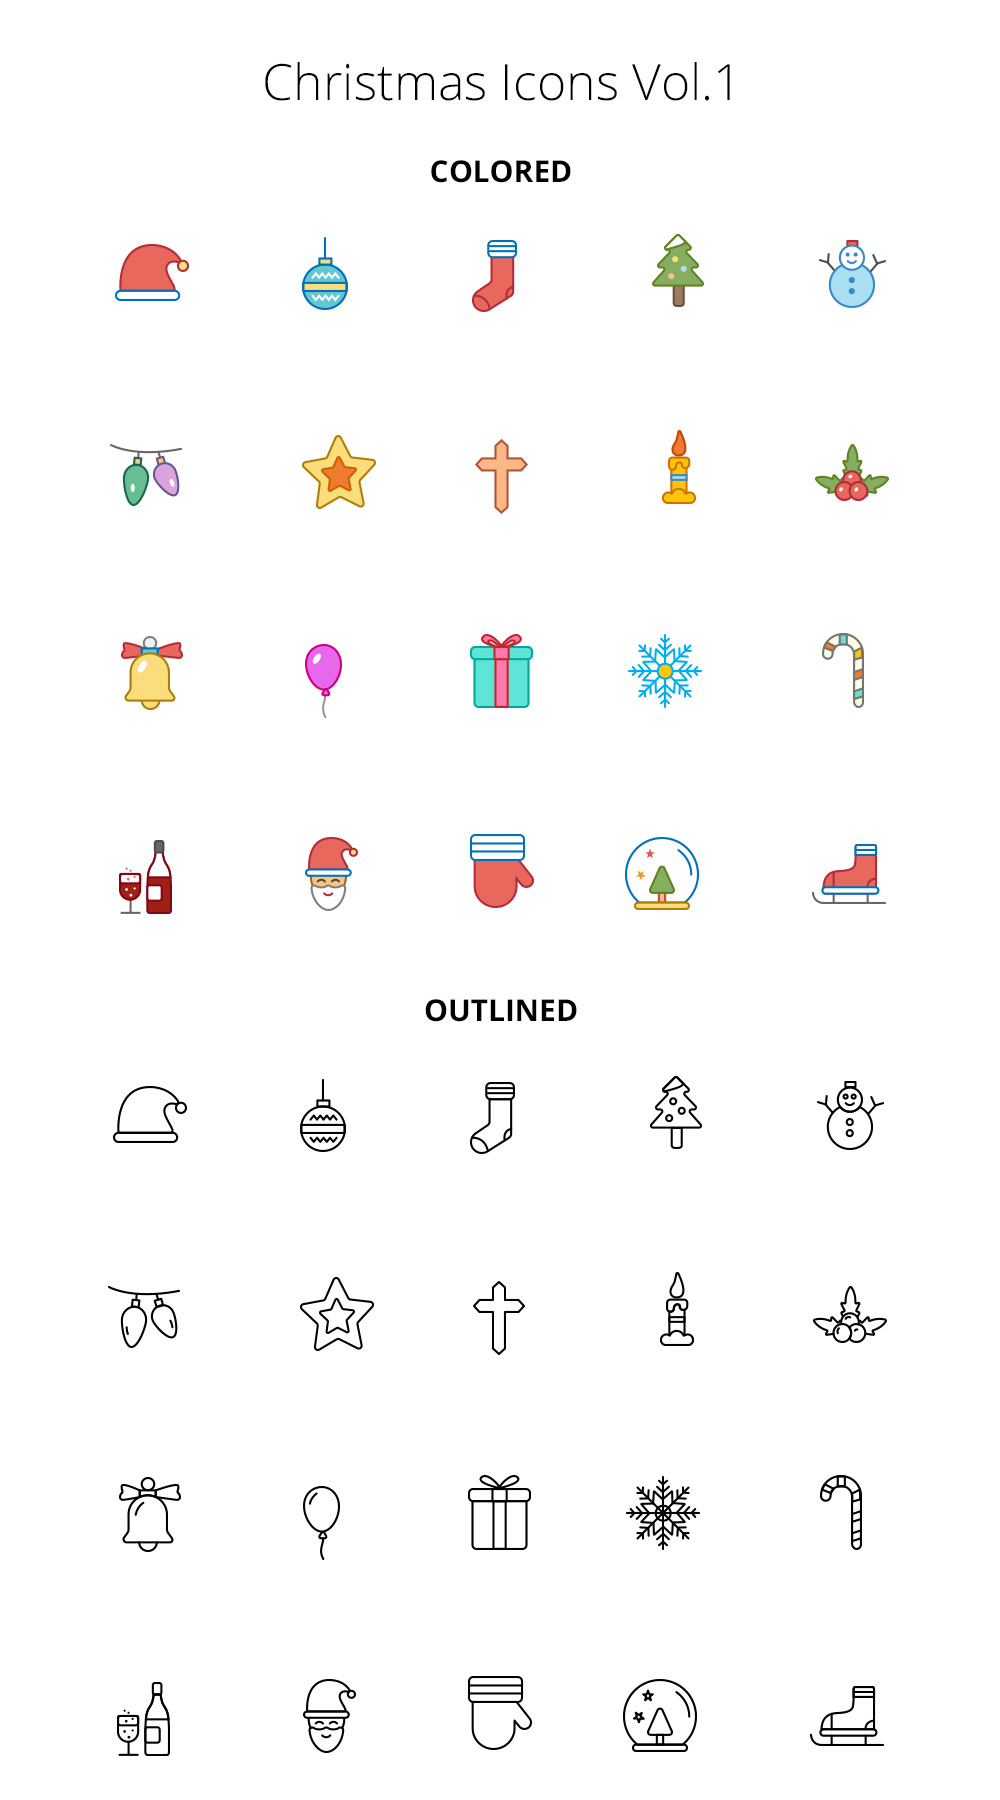 Christmas Color And Outline Icons Vol.1